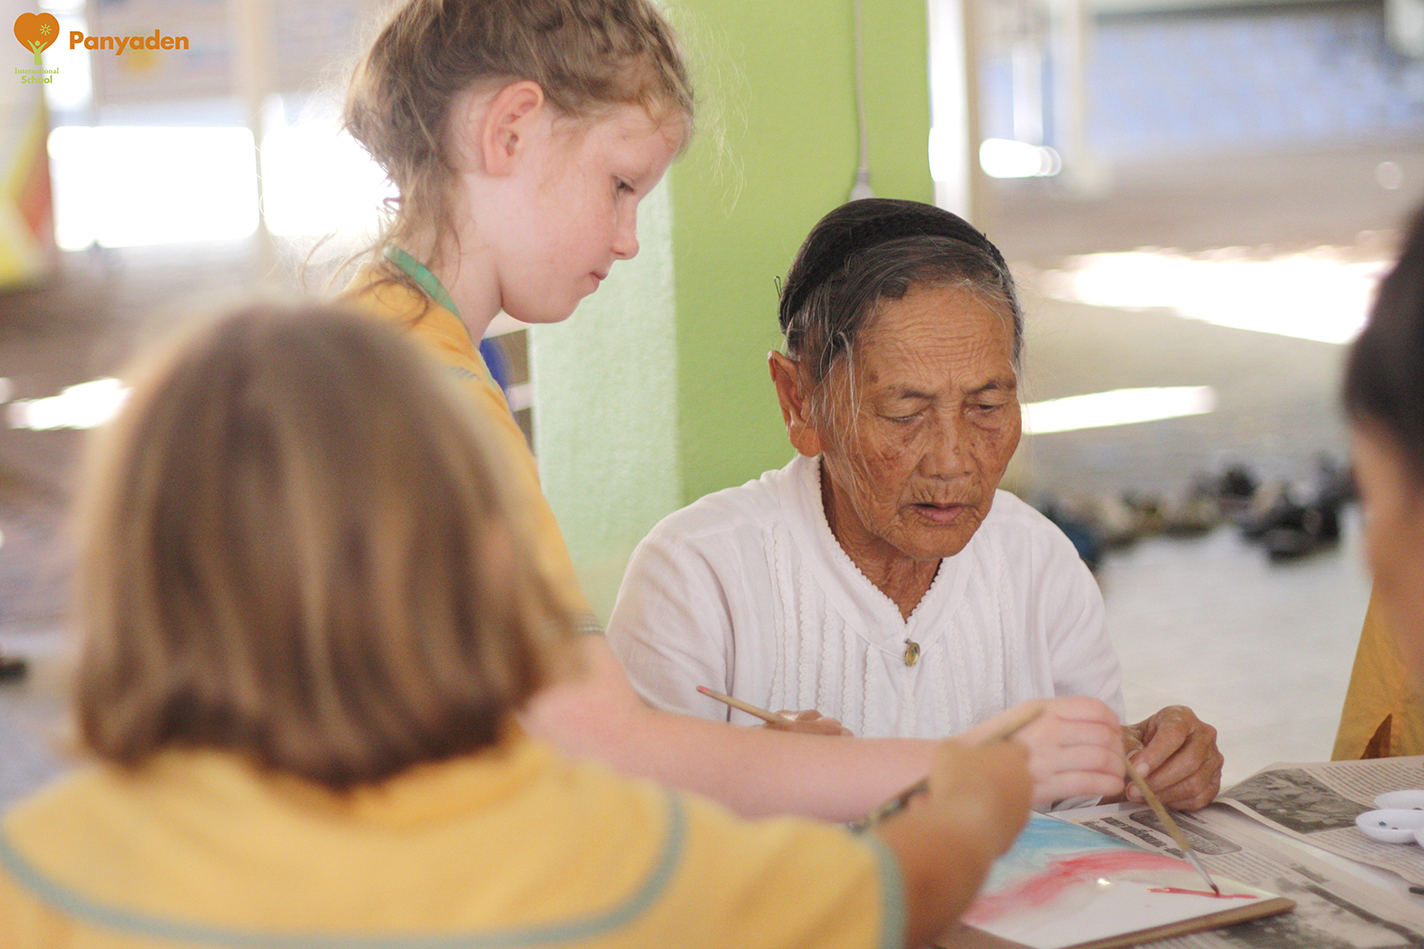 Panyaden Social Contribution Day: Panyaden student painting with resident at elder aId home in Chiang Mai